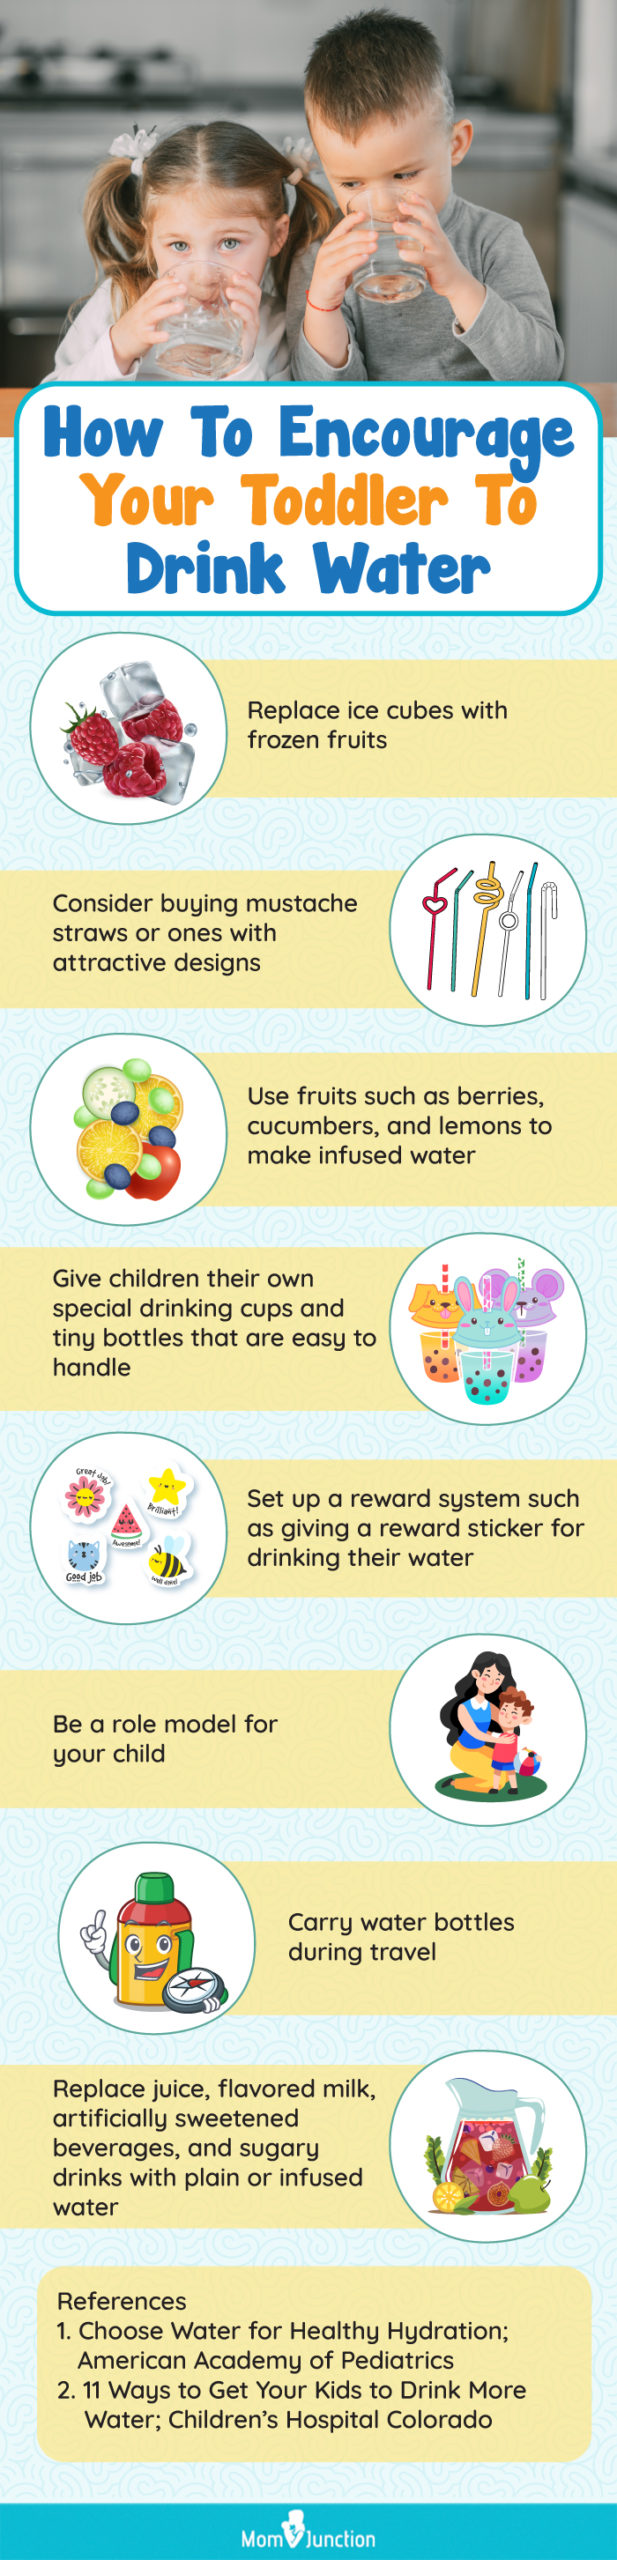 how to encourage your toddler to drink water (infographic)